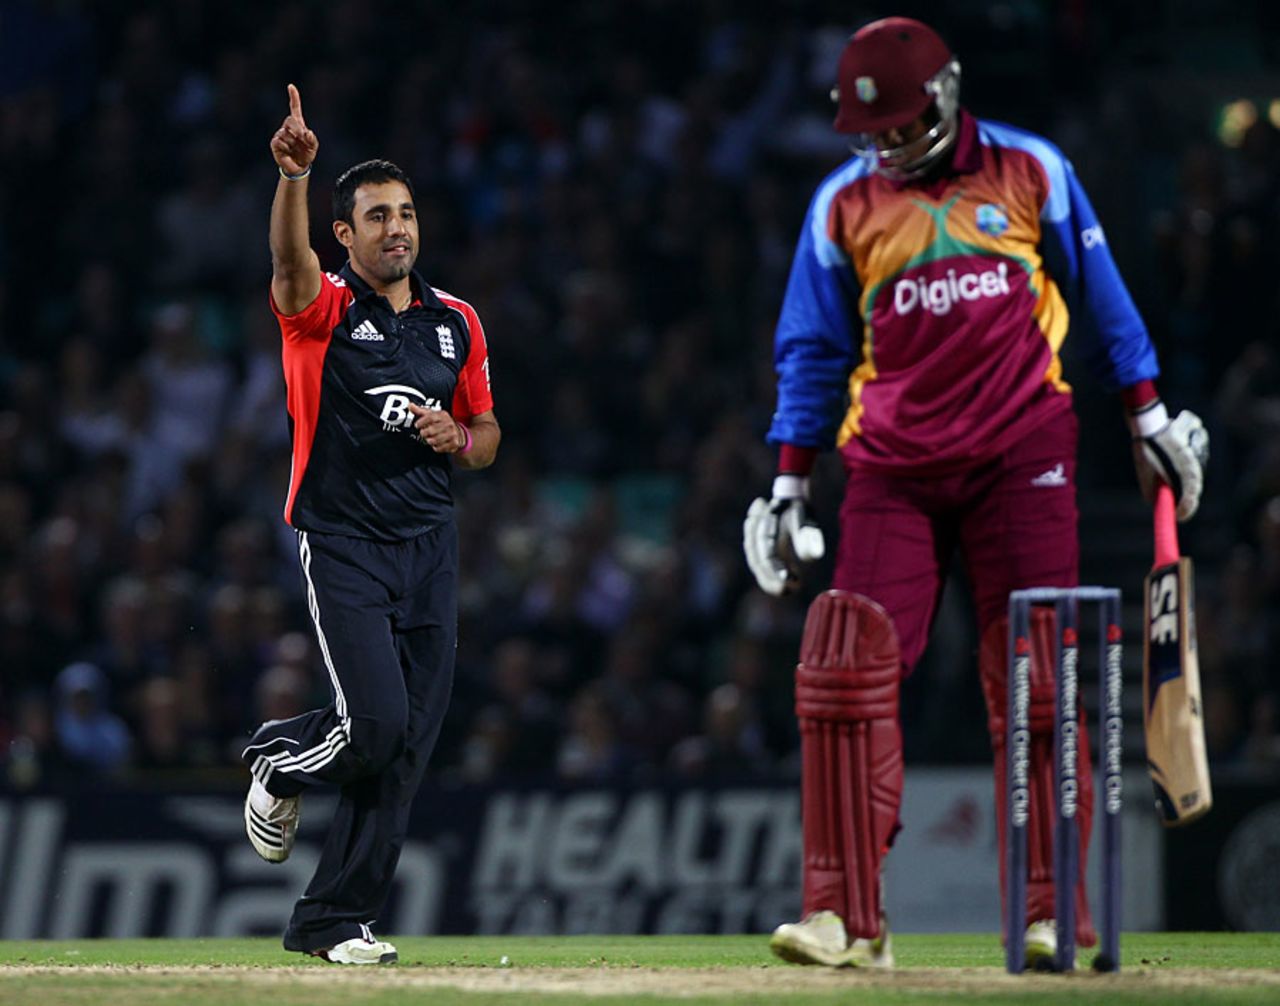 Ravi Bopara enjoyed his evening with the ball, England v West Indies, 1st Twenty20, The Oval, September 23, 2011